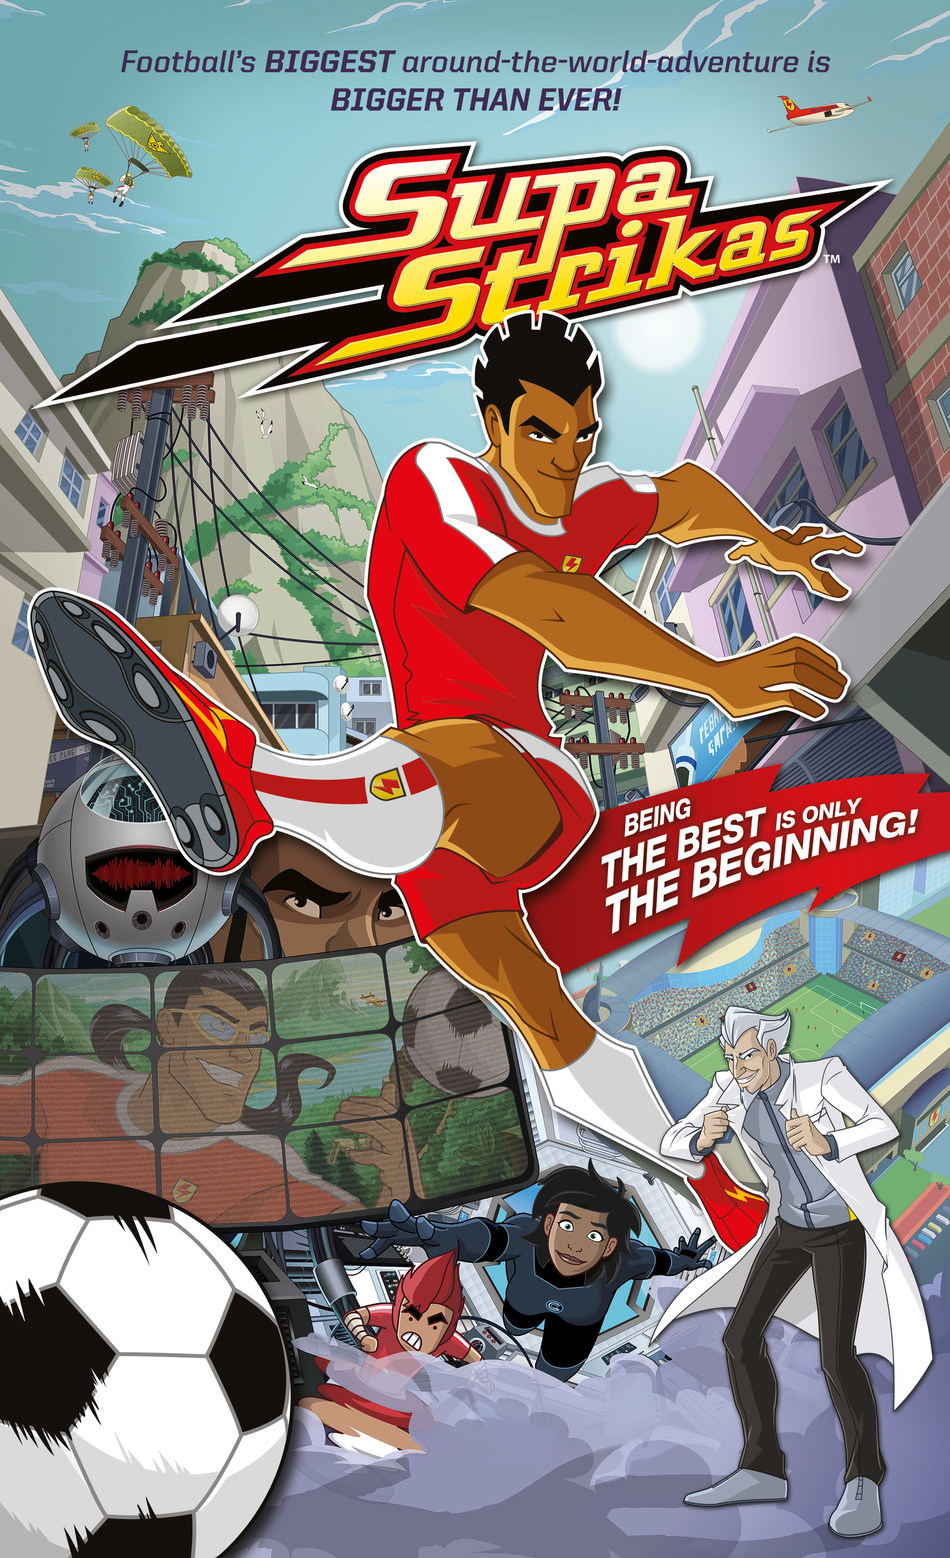 The Leading Football Series Supa Strikas From Moonbug To Be Launched In India